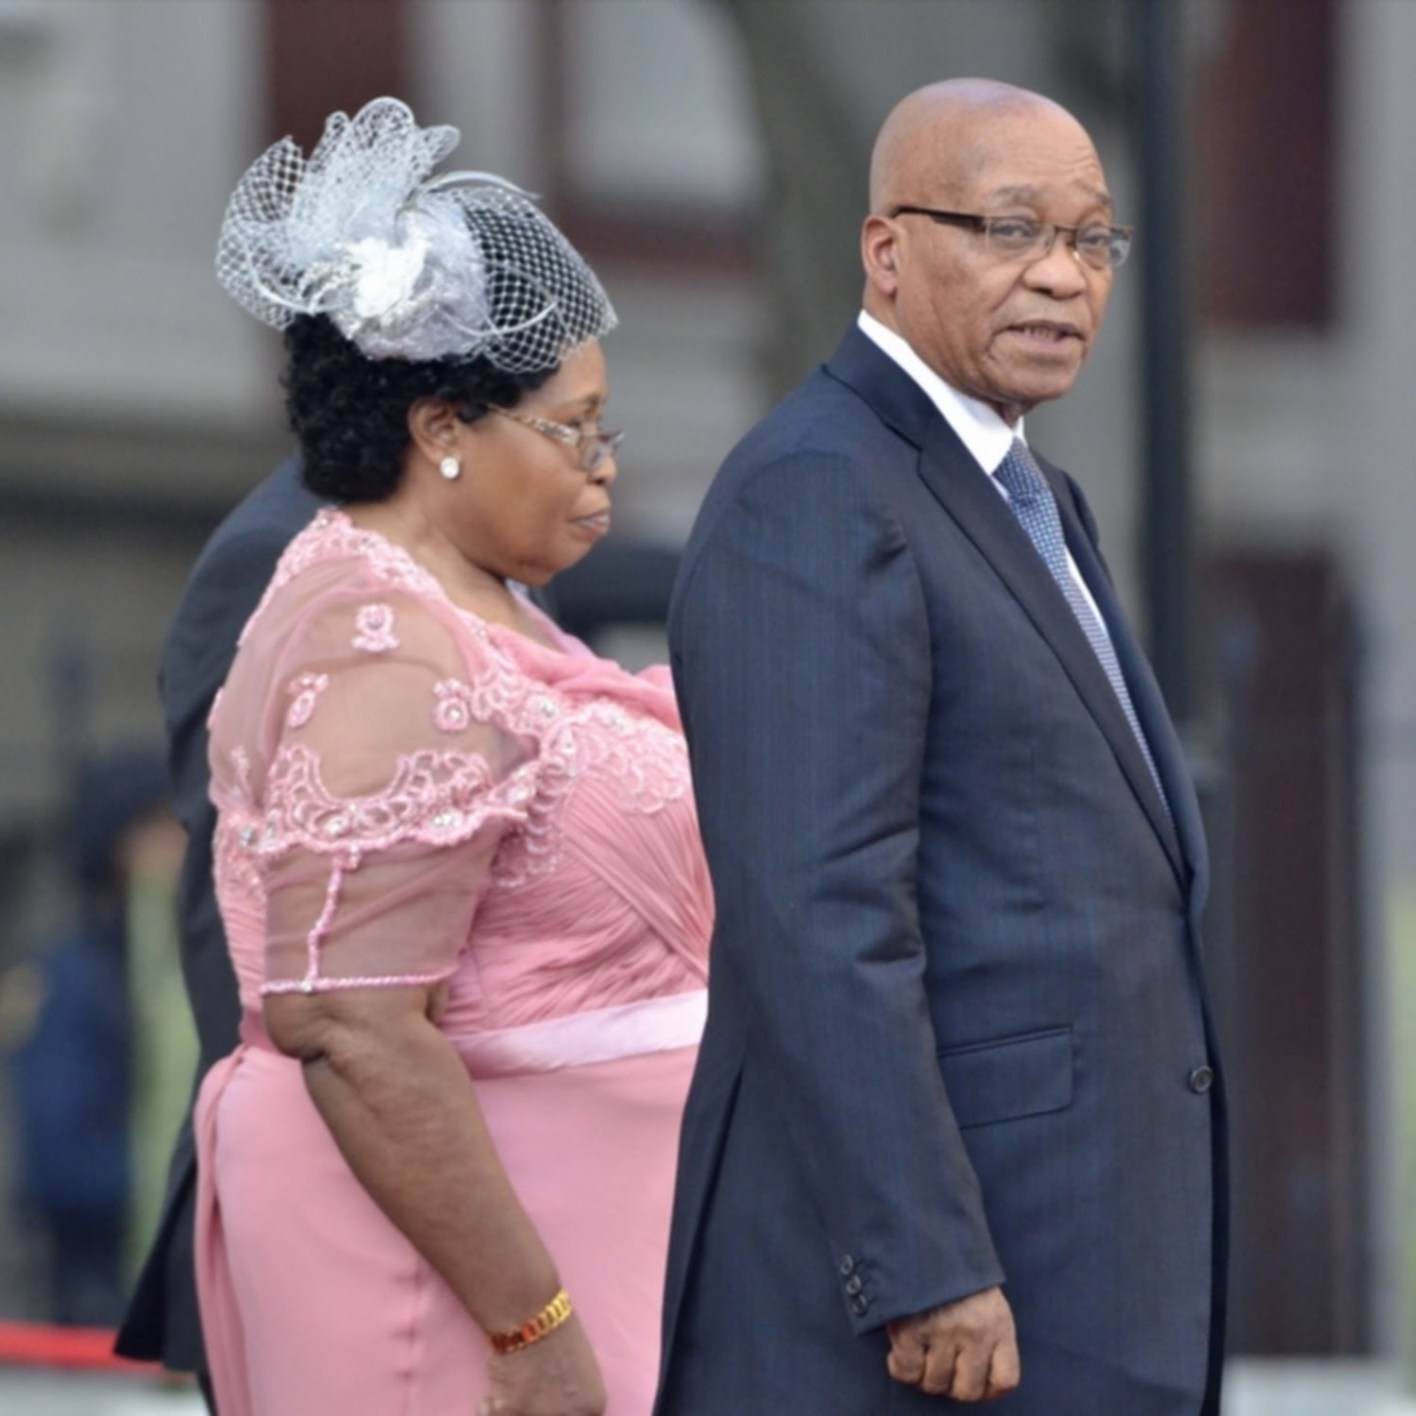 Police told bring Jacob Zuma back alive and in one piece